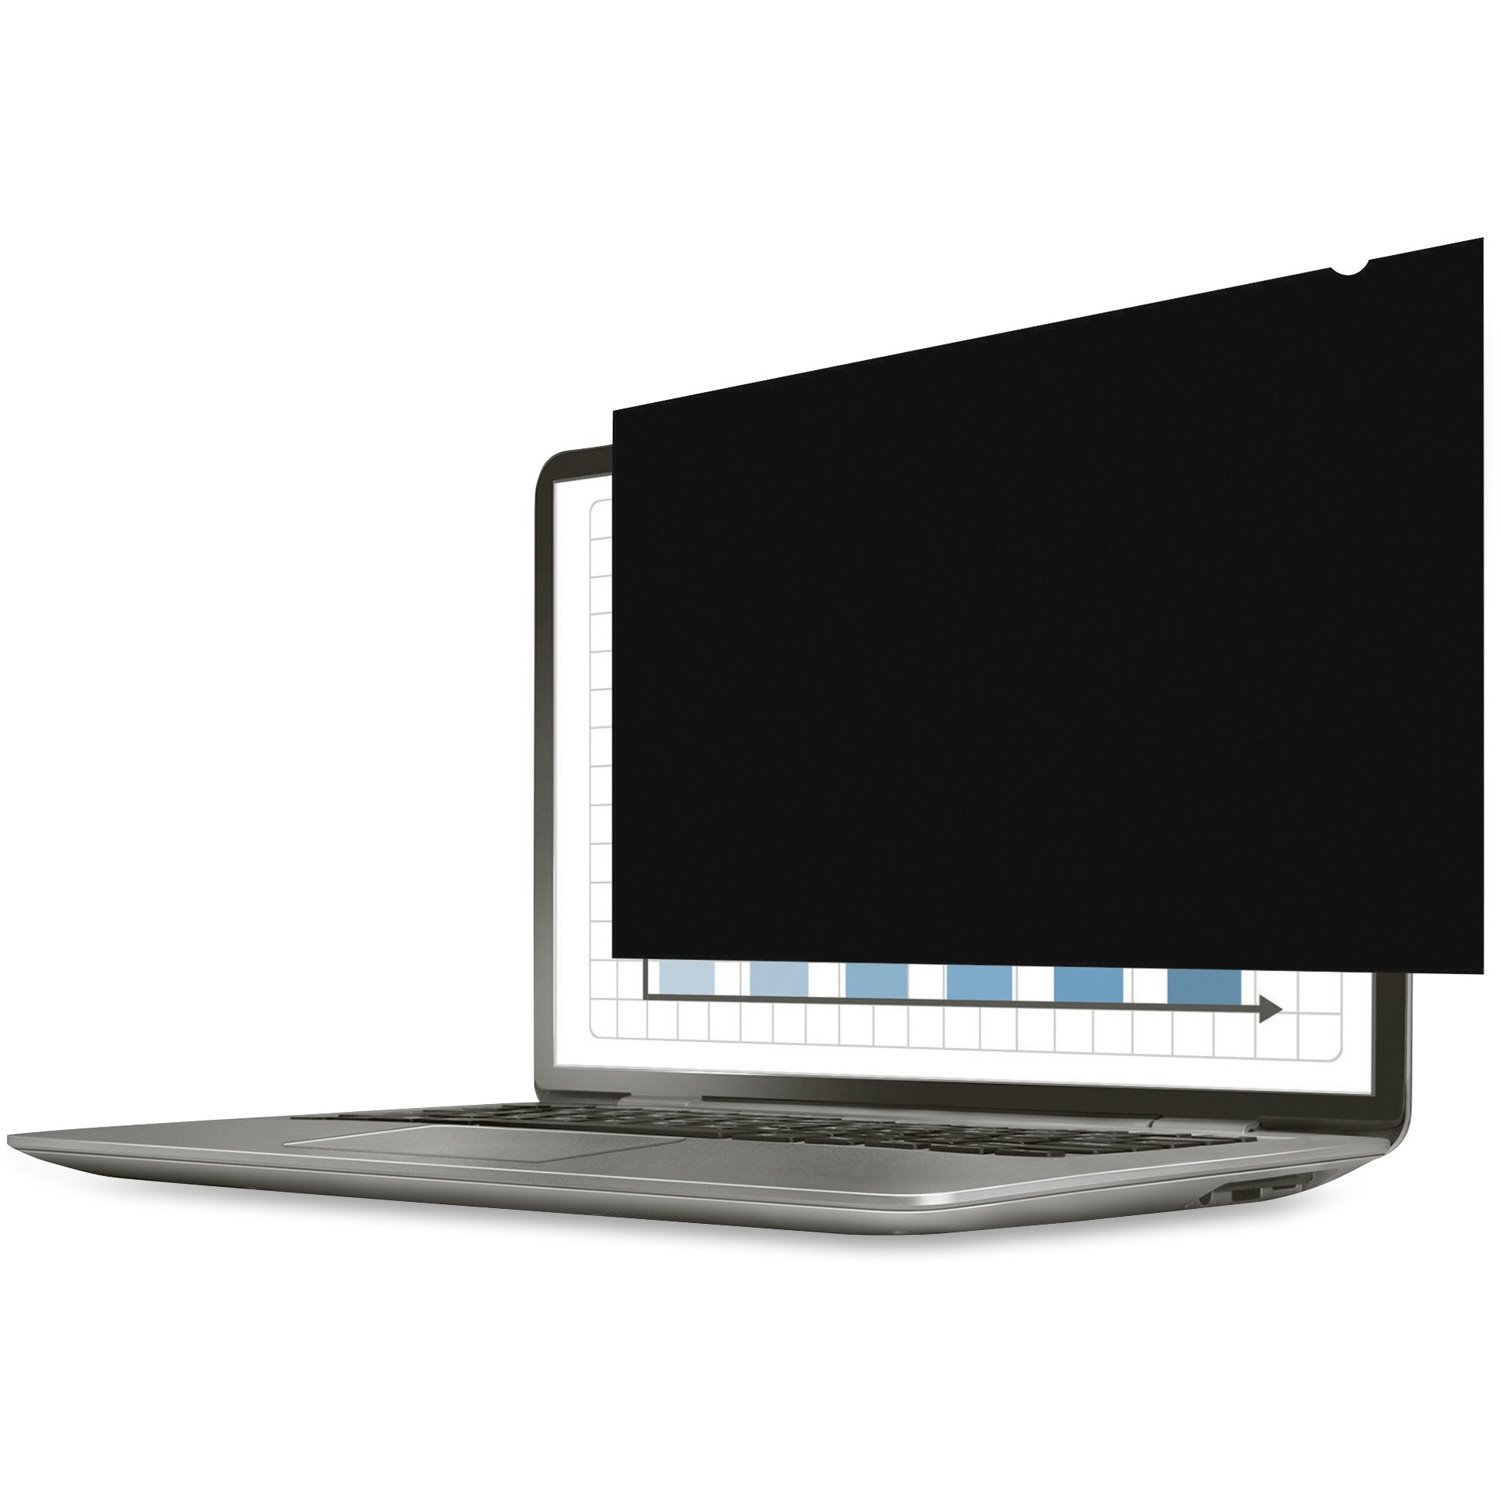 Fellowes PrivaScreen&trade; Blackout Privacy Filter - 24.0" Wide